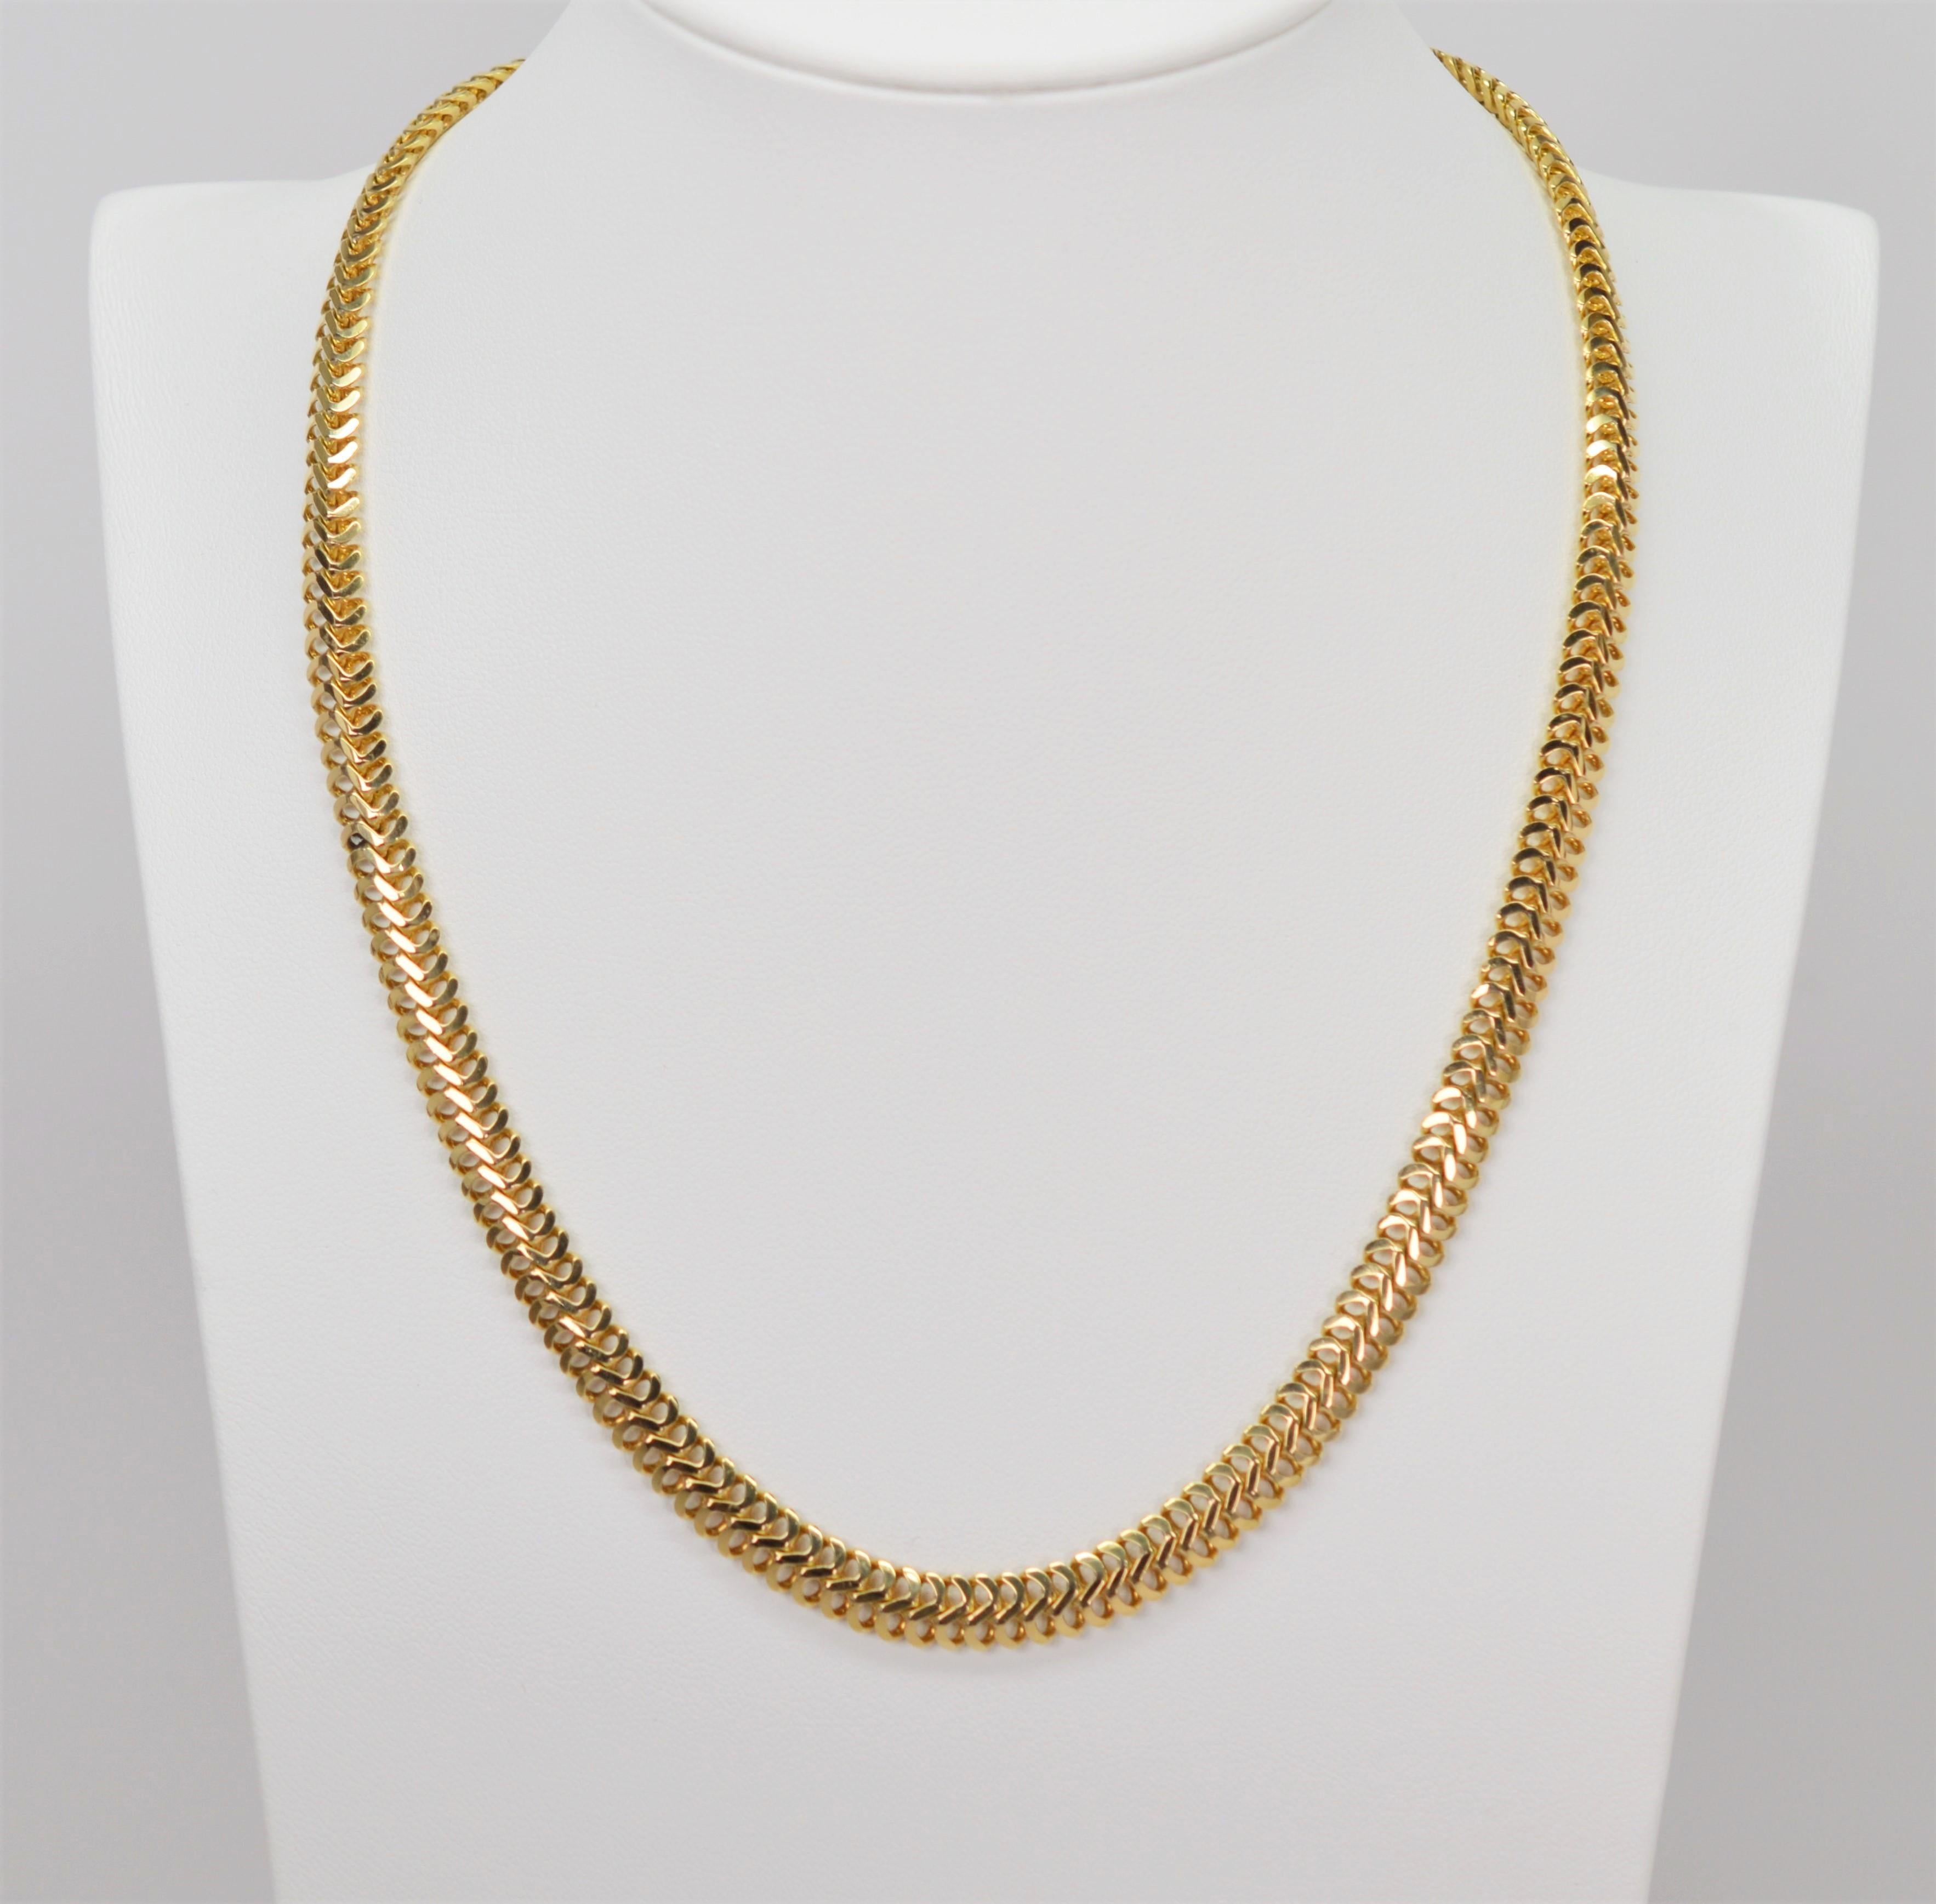 In bright eighteen karat 18k yellow gold, enjoy this high quality, Italian made 7mm snake chain necklace. Of substantial weight, the necklace is eighteen (18) inches in length and finished with box lock and safety. Gift Boxed.